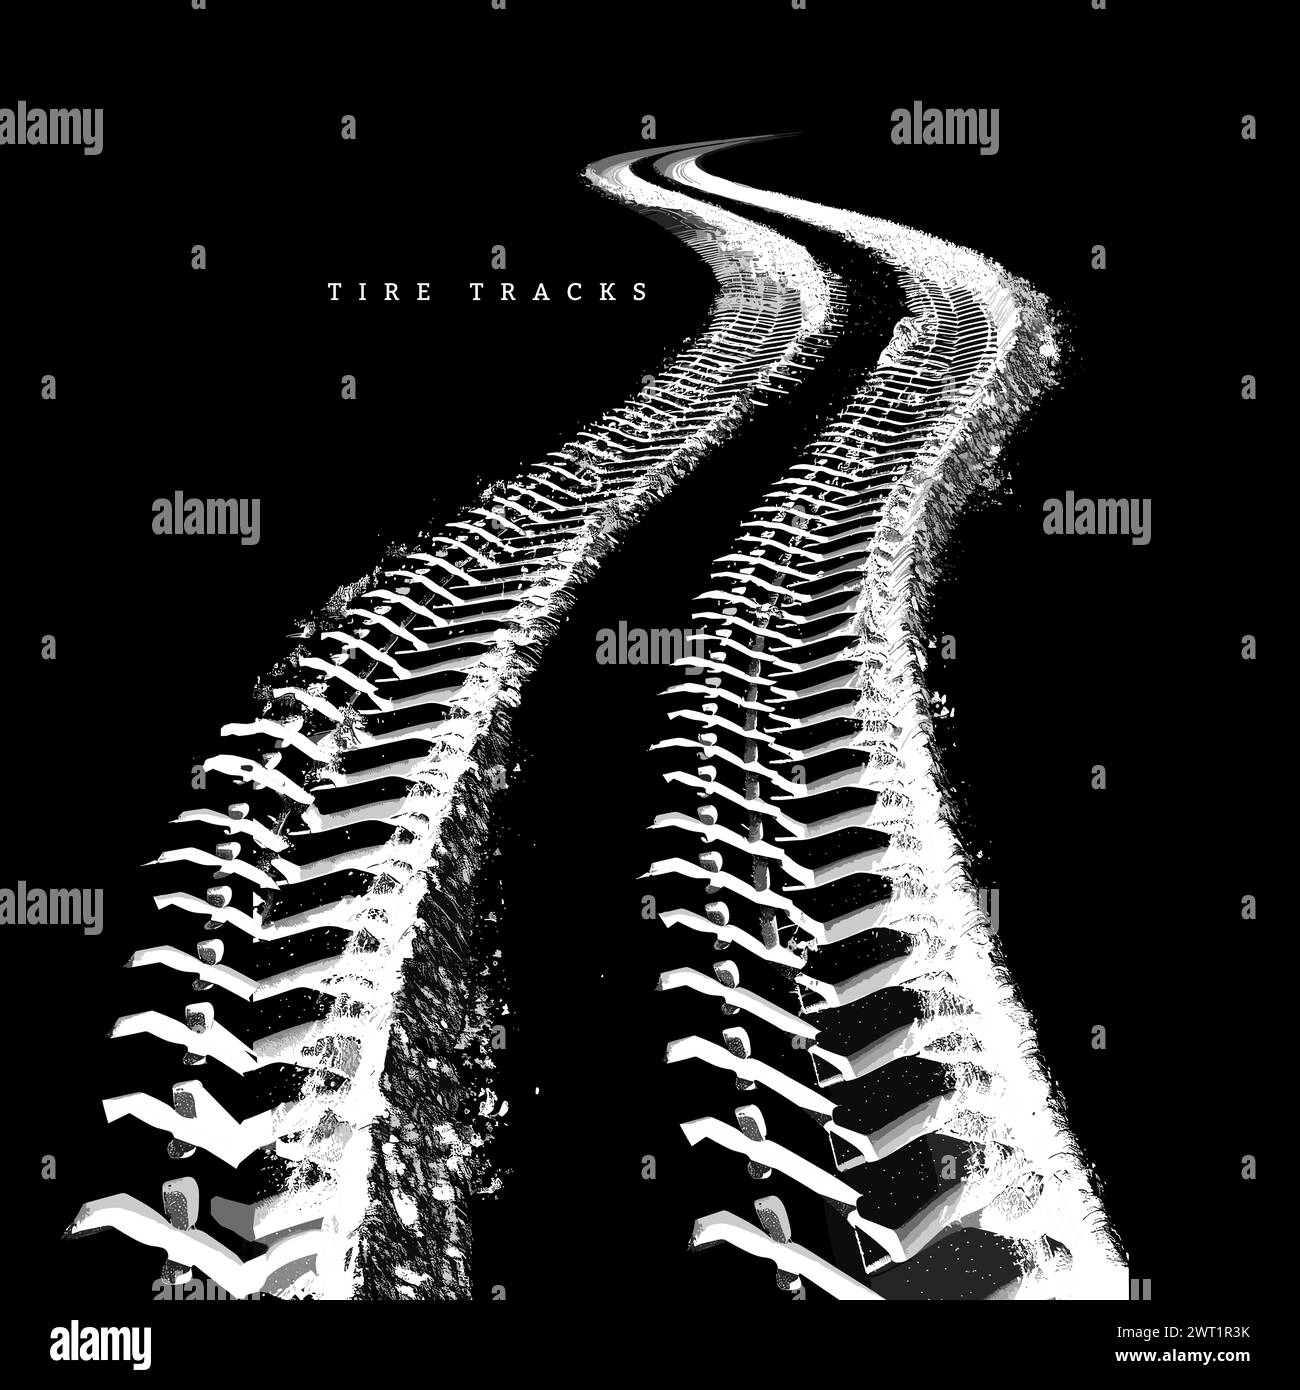 Tire tracks vector illustration isolated on black background Stock Vector